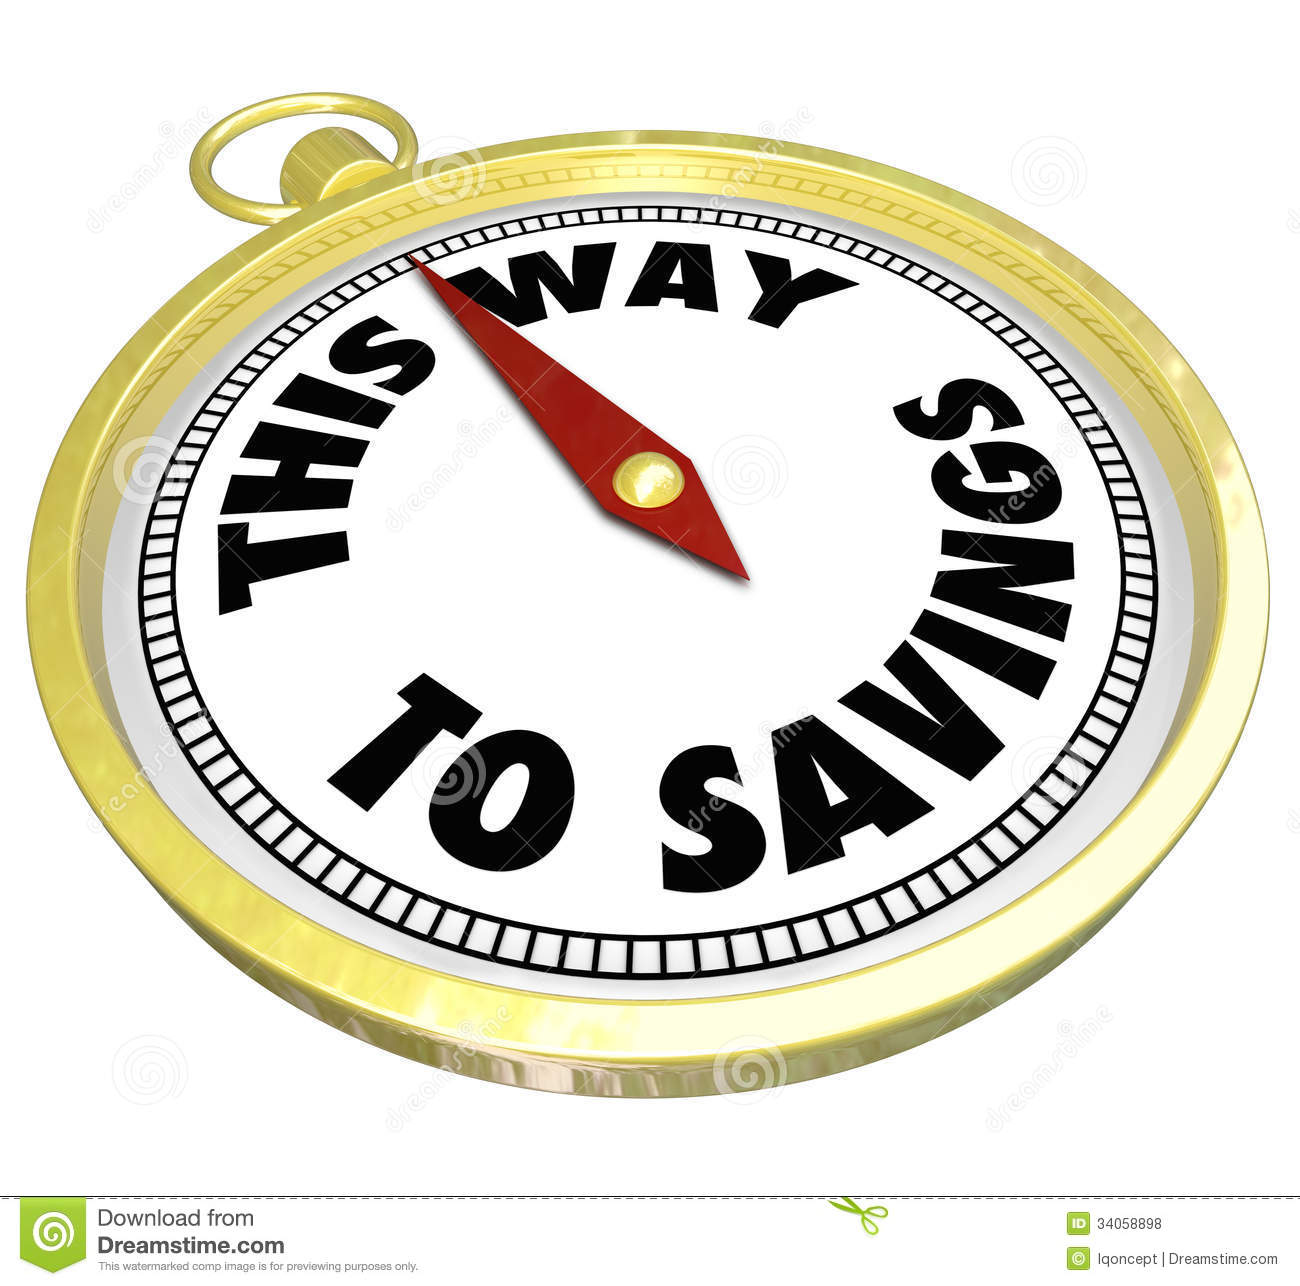 This Way To Savings Compass Sale Clearance Blowout Royalty Free Stock